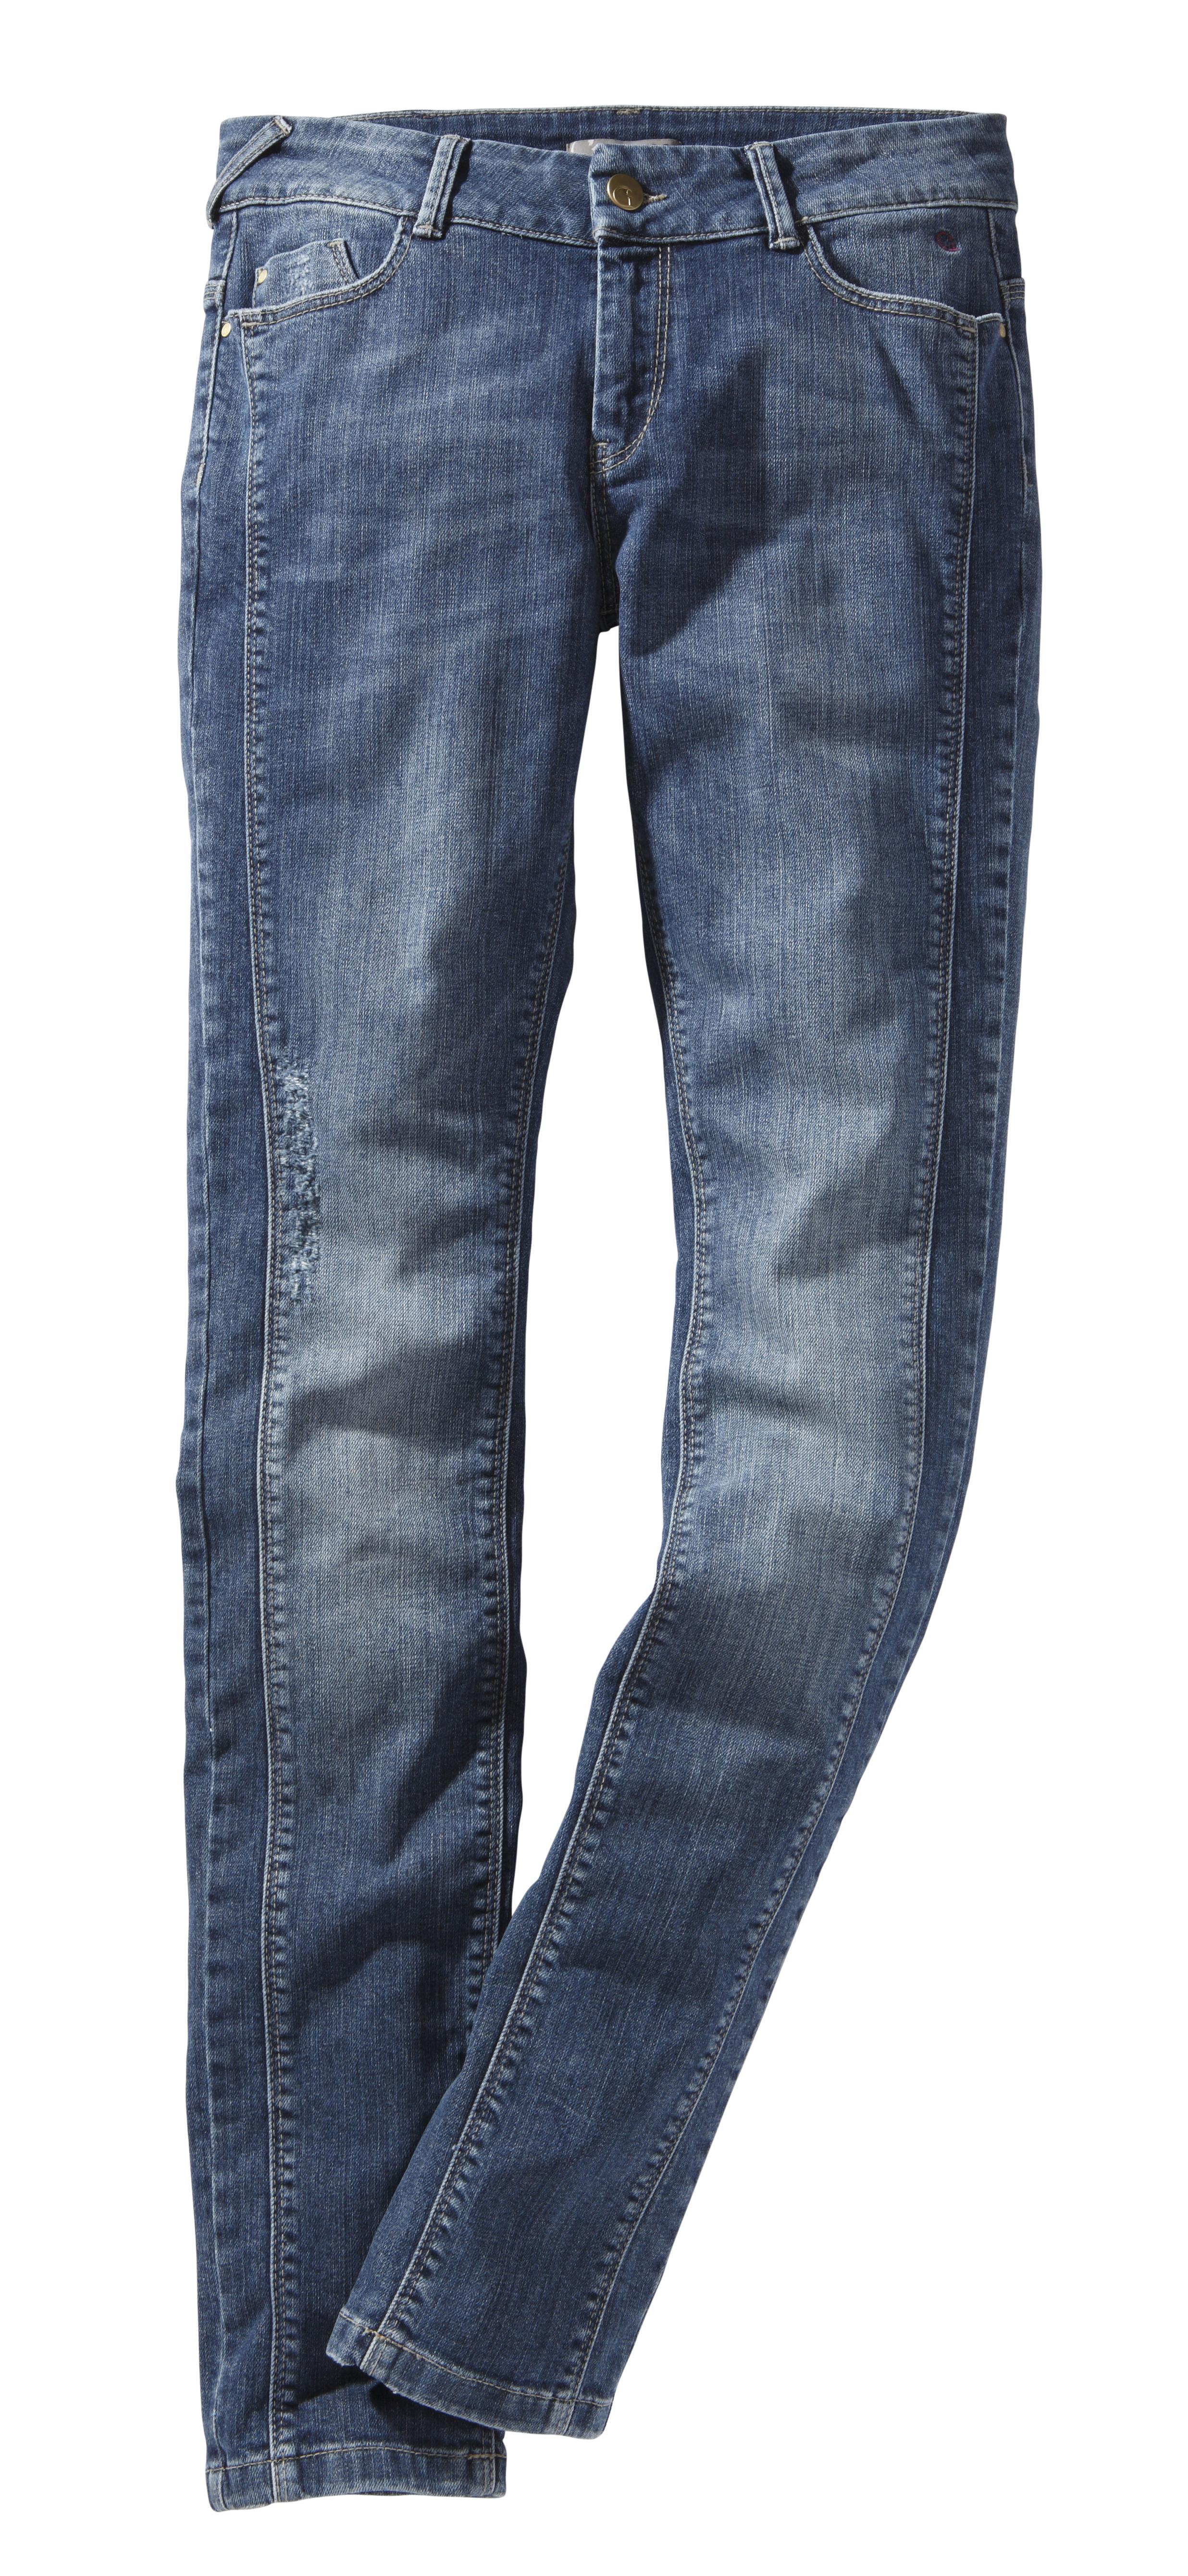 Jeans - 85,95 euro